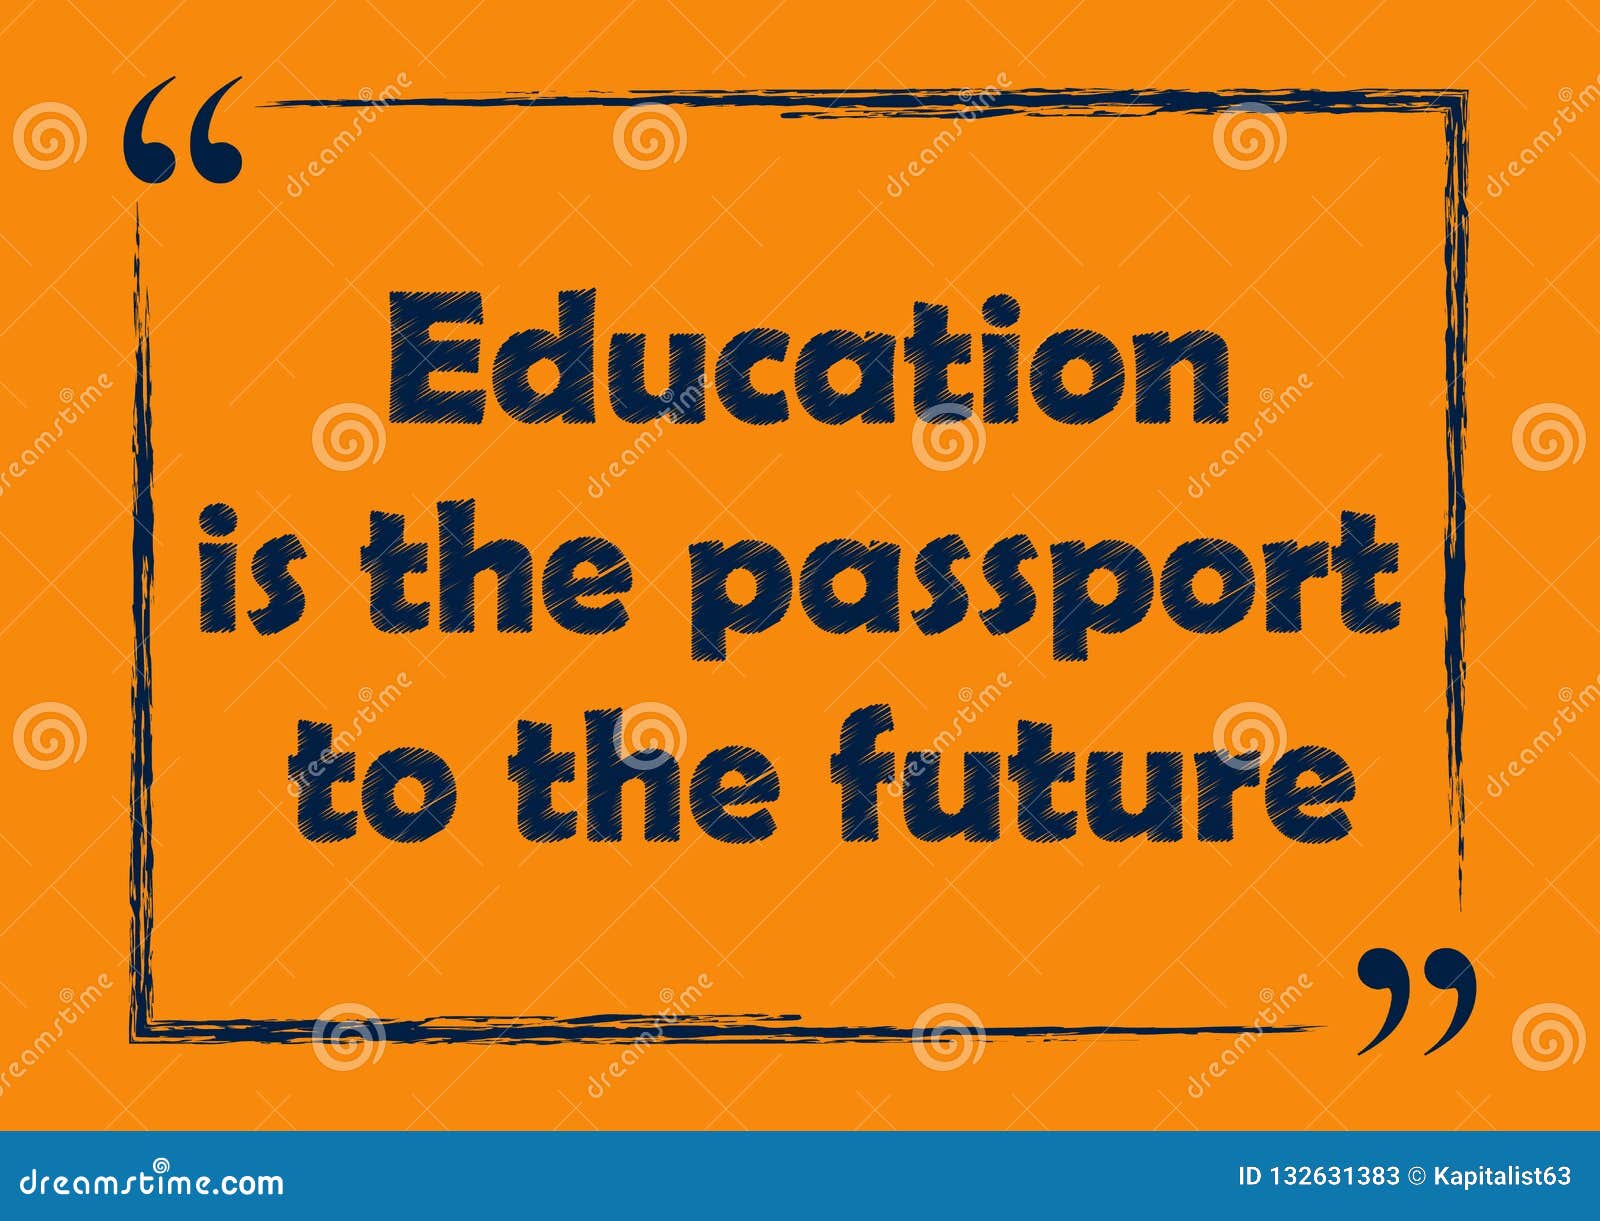 Education is our passport to the future, for